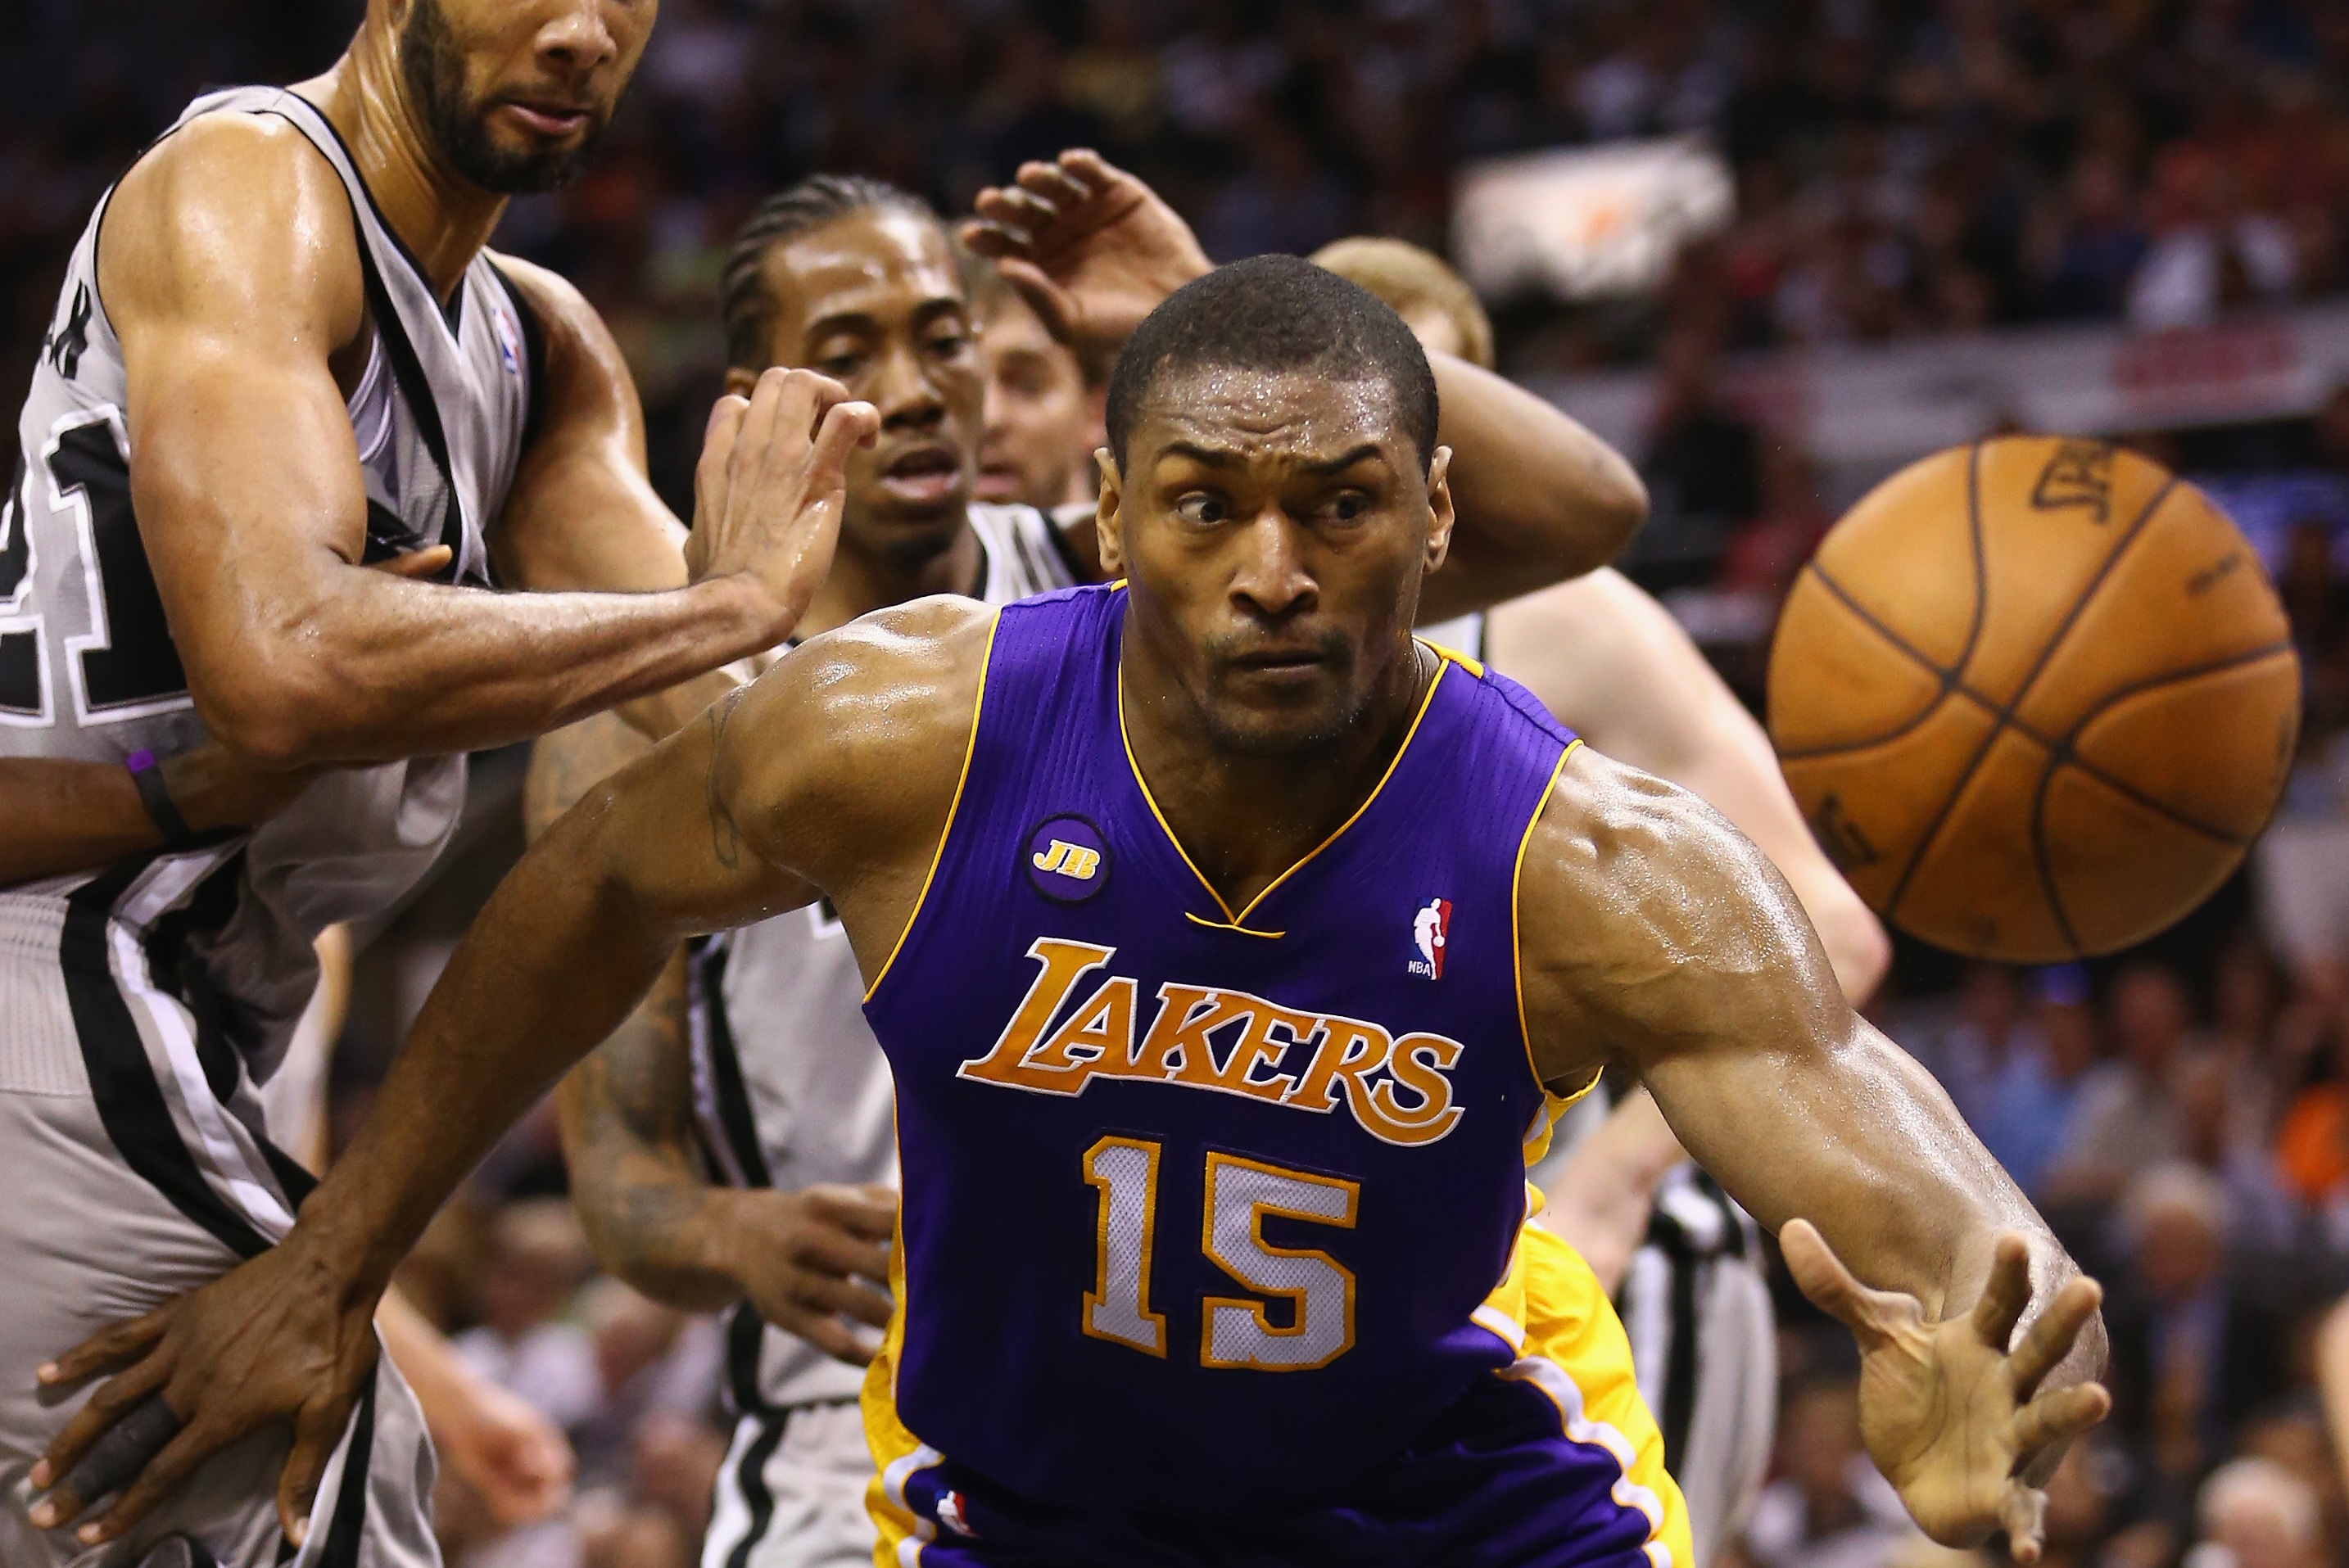 Los Angeles Lakers small forward Metta World Peace, right, works